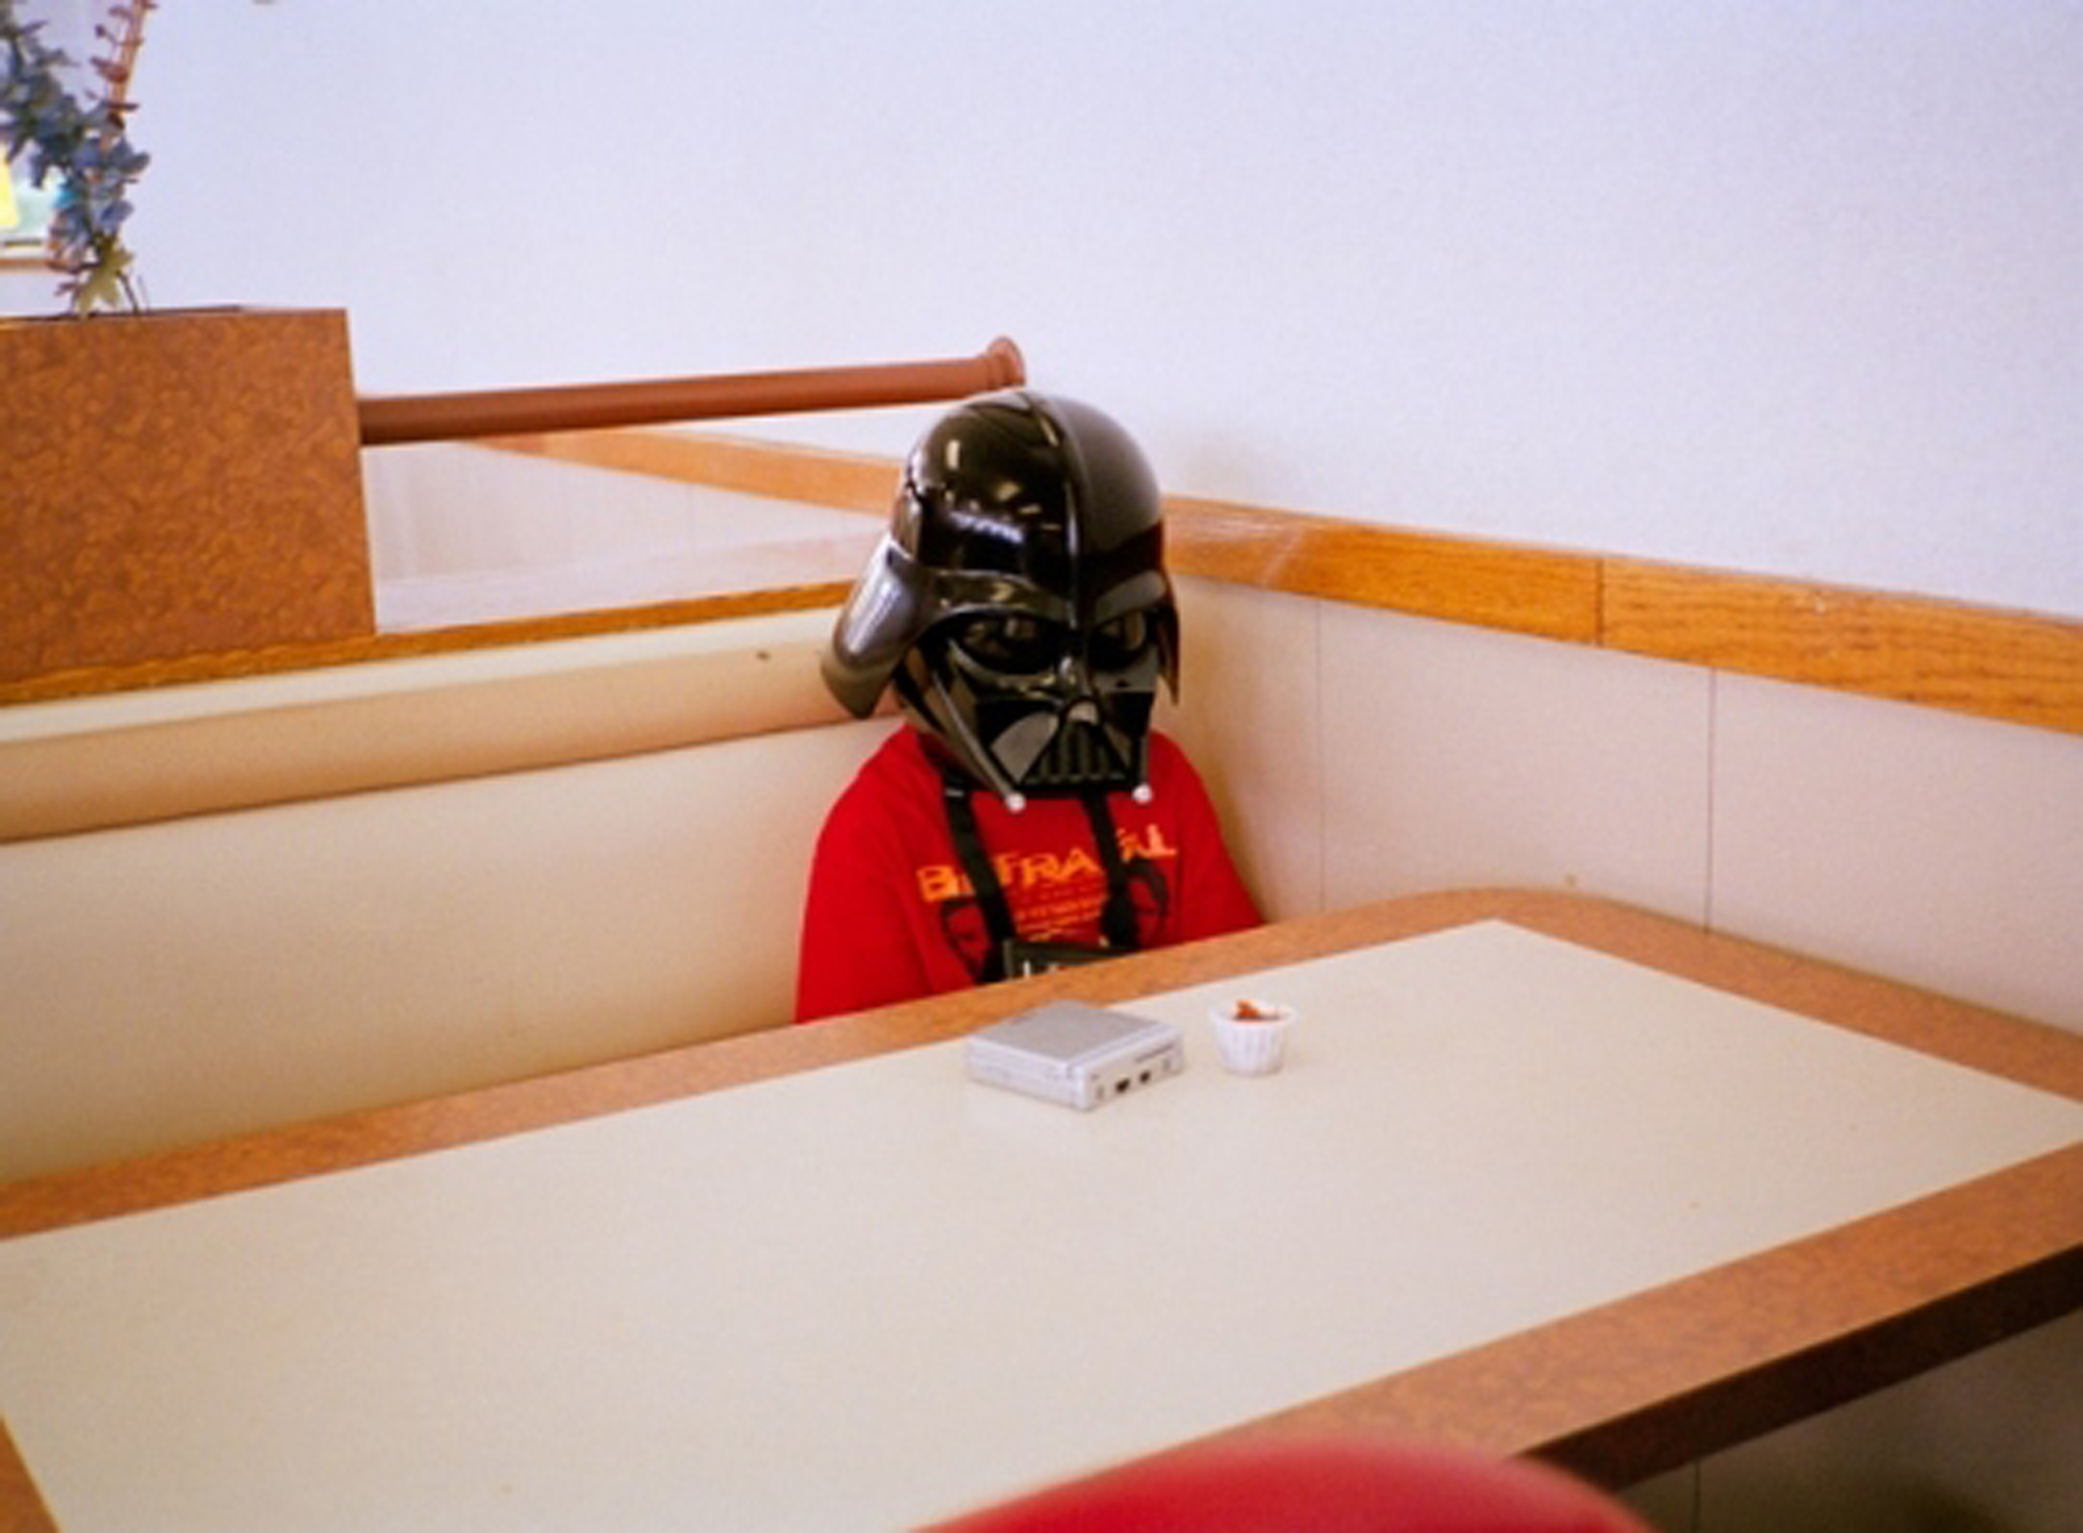 This photo of a kid dressed as Darth Vader inside a Burger King inspired the creative team at Deutsch as they were making "The Force" ad. (Courtesy of Deutsch)